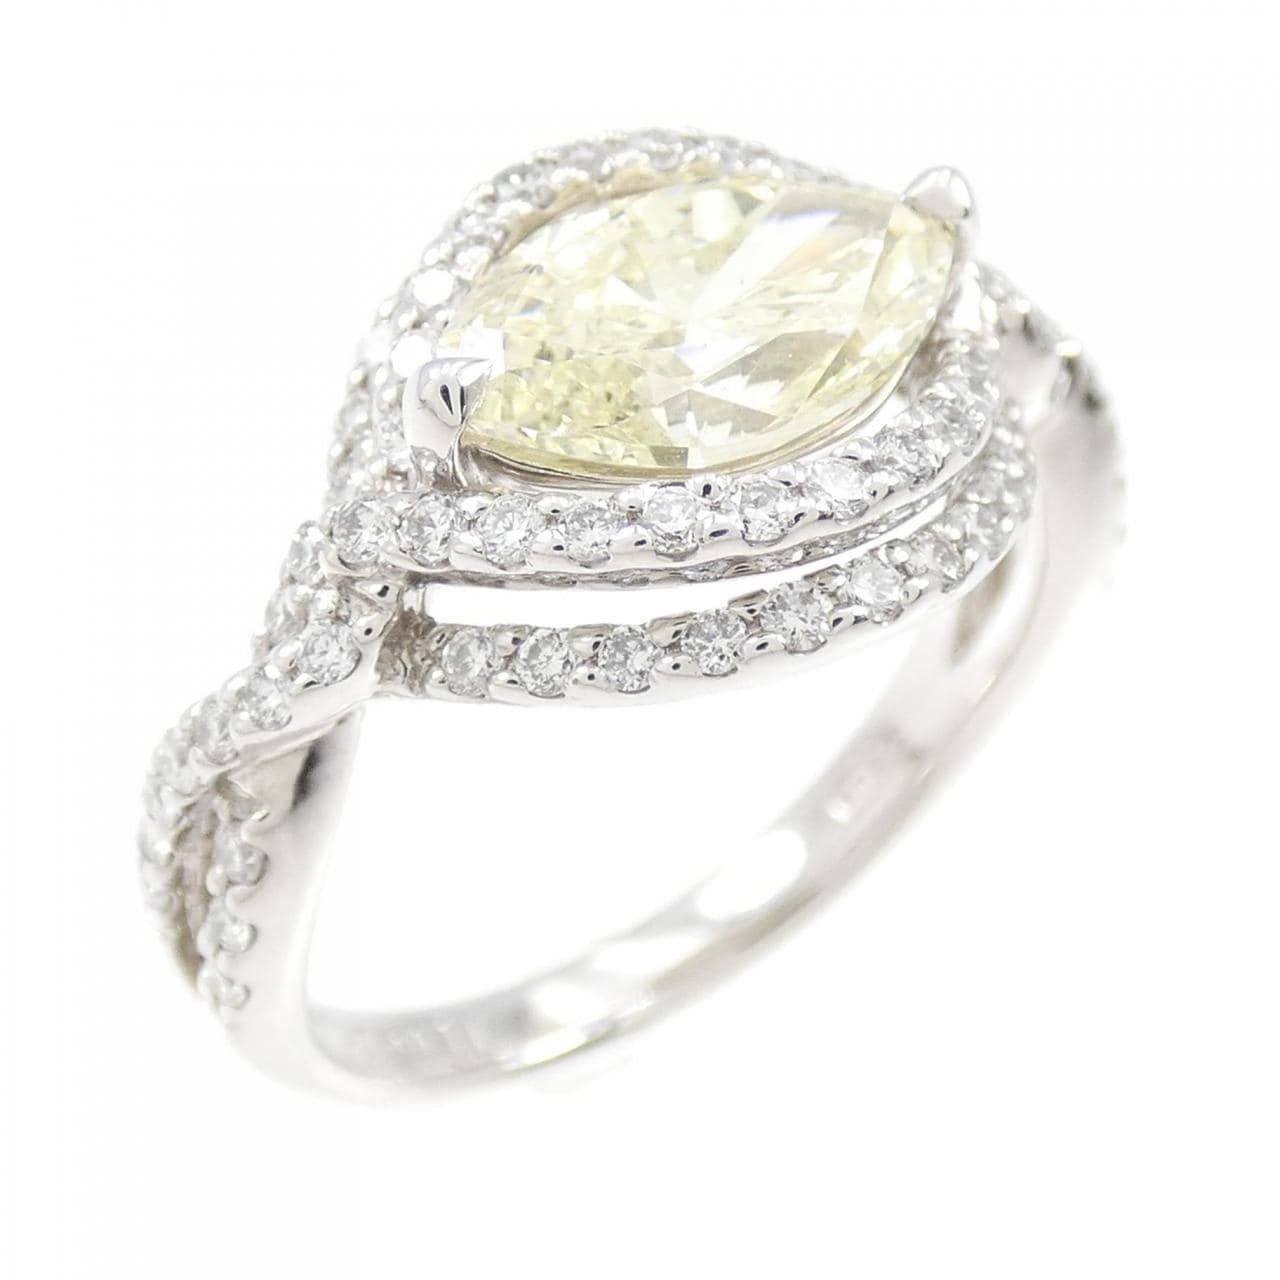 PT Diamond Ring 1.509CT VLY SI2 Marquise Cut